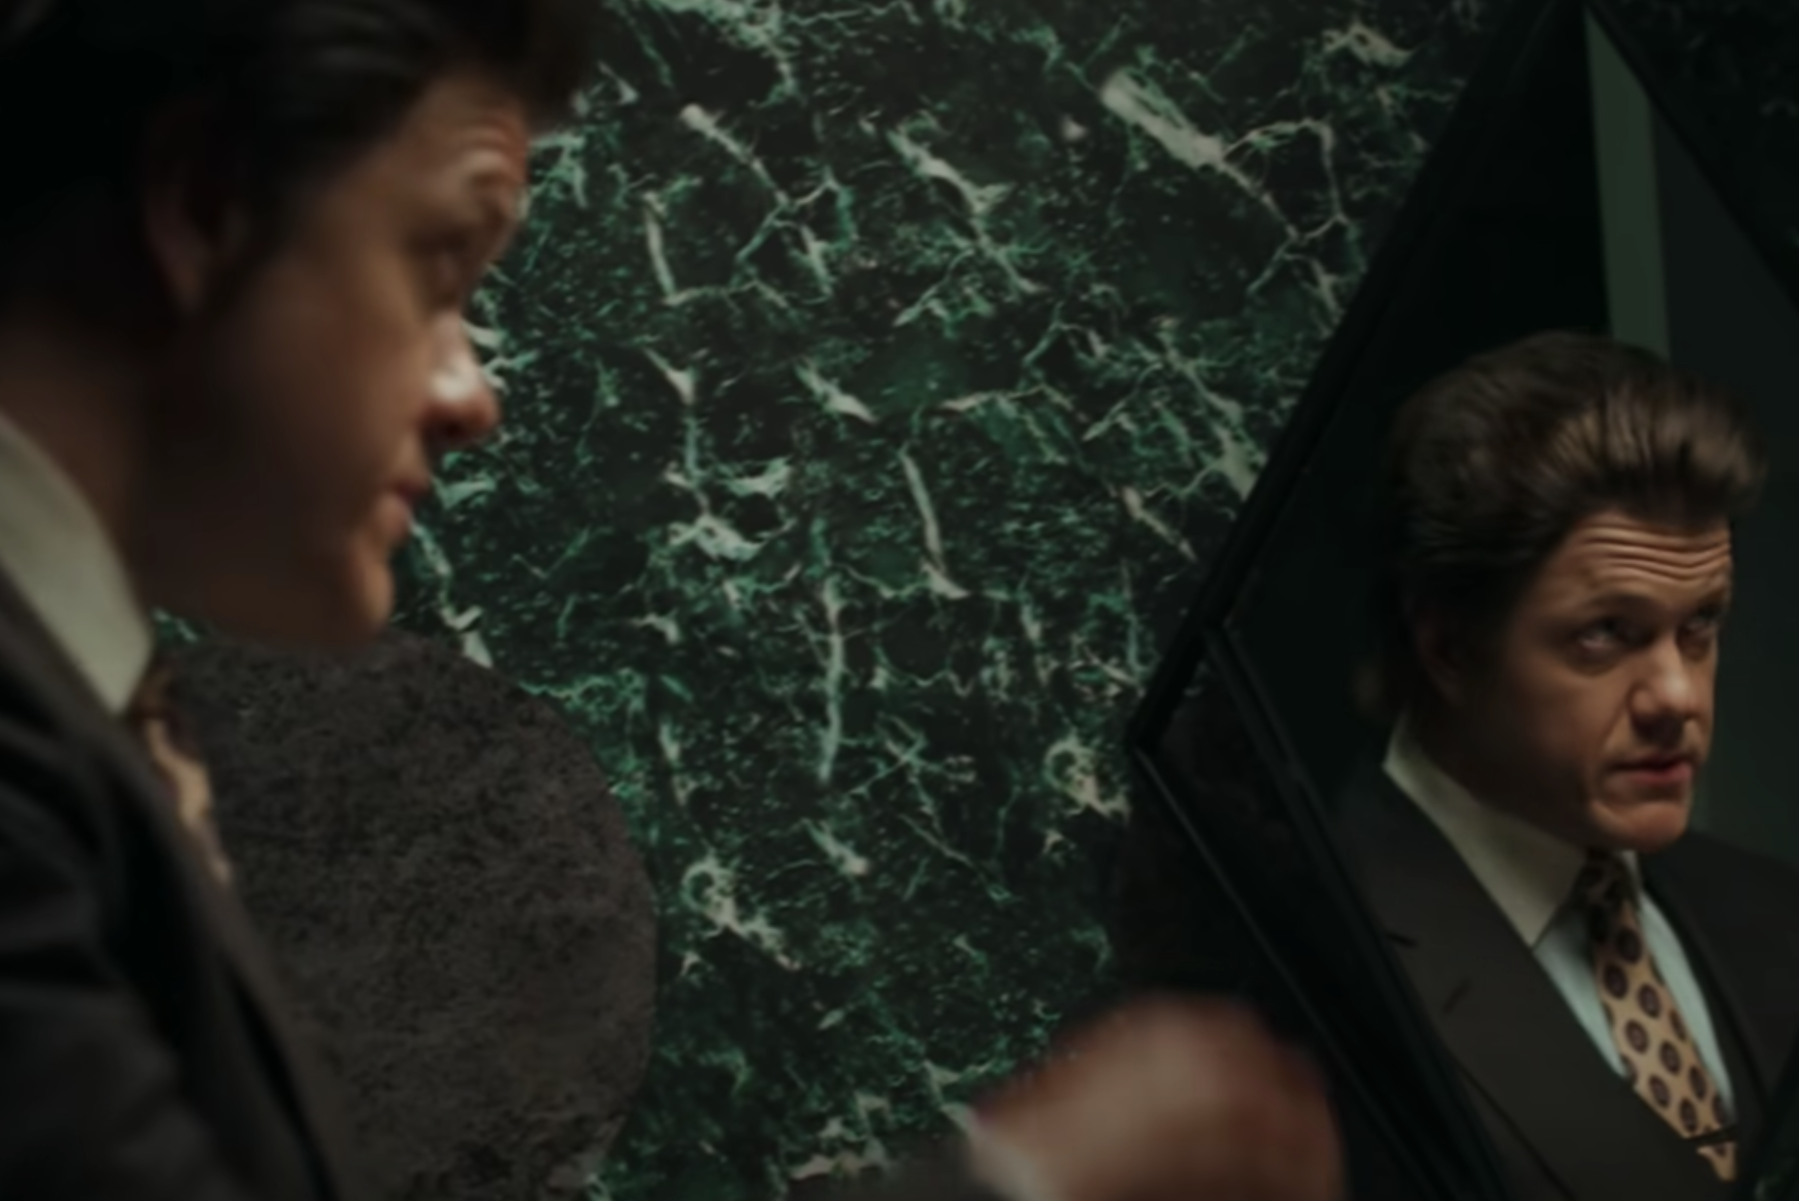 A screenshot from Mercury: Part 2 song Bone's music video showing a man staring into a mirror absentmindedly.